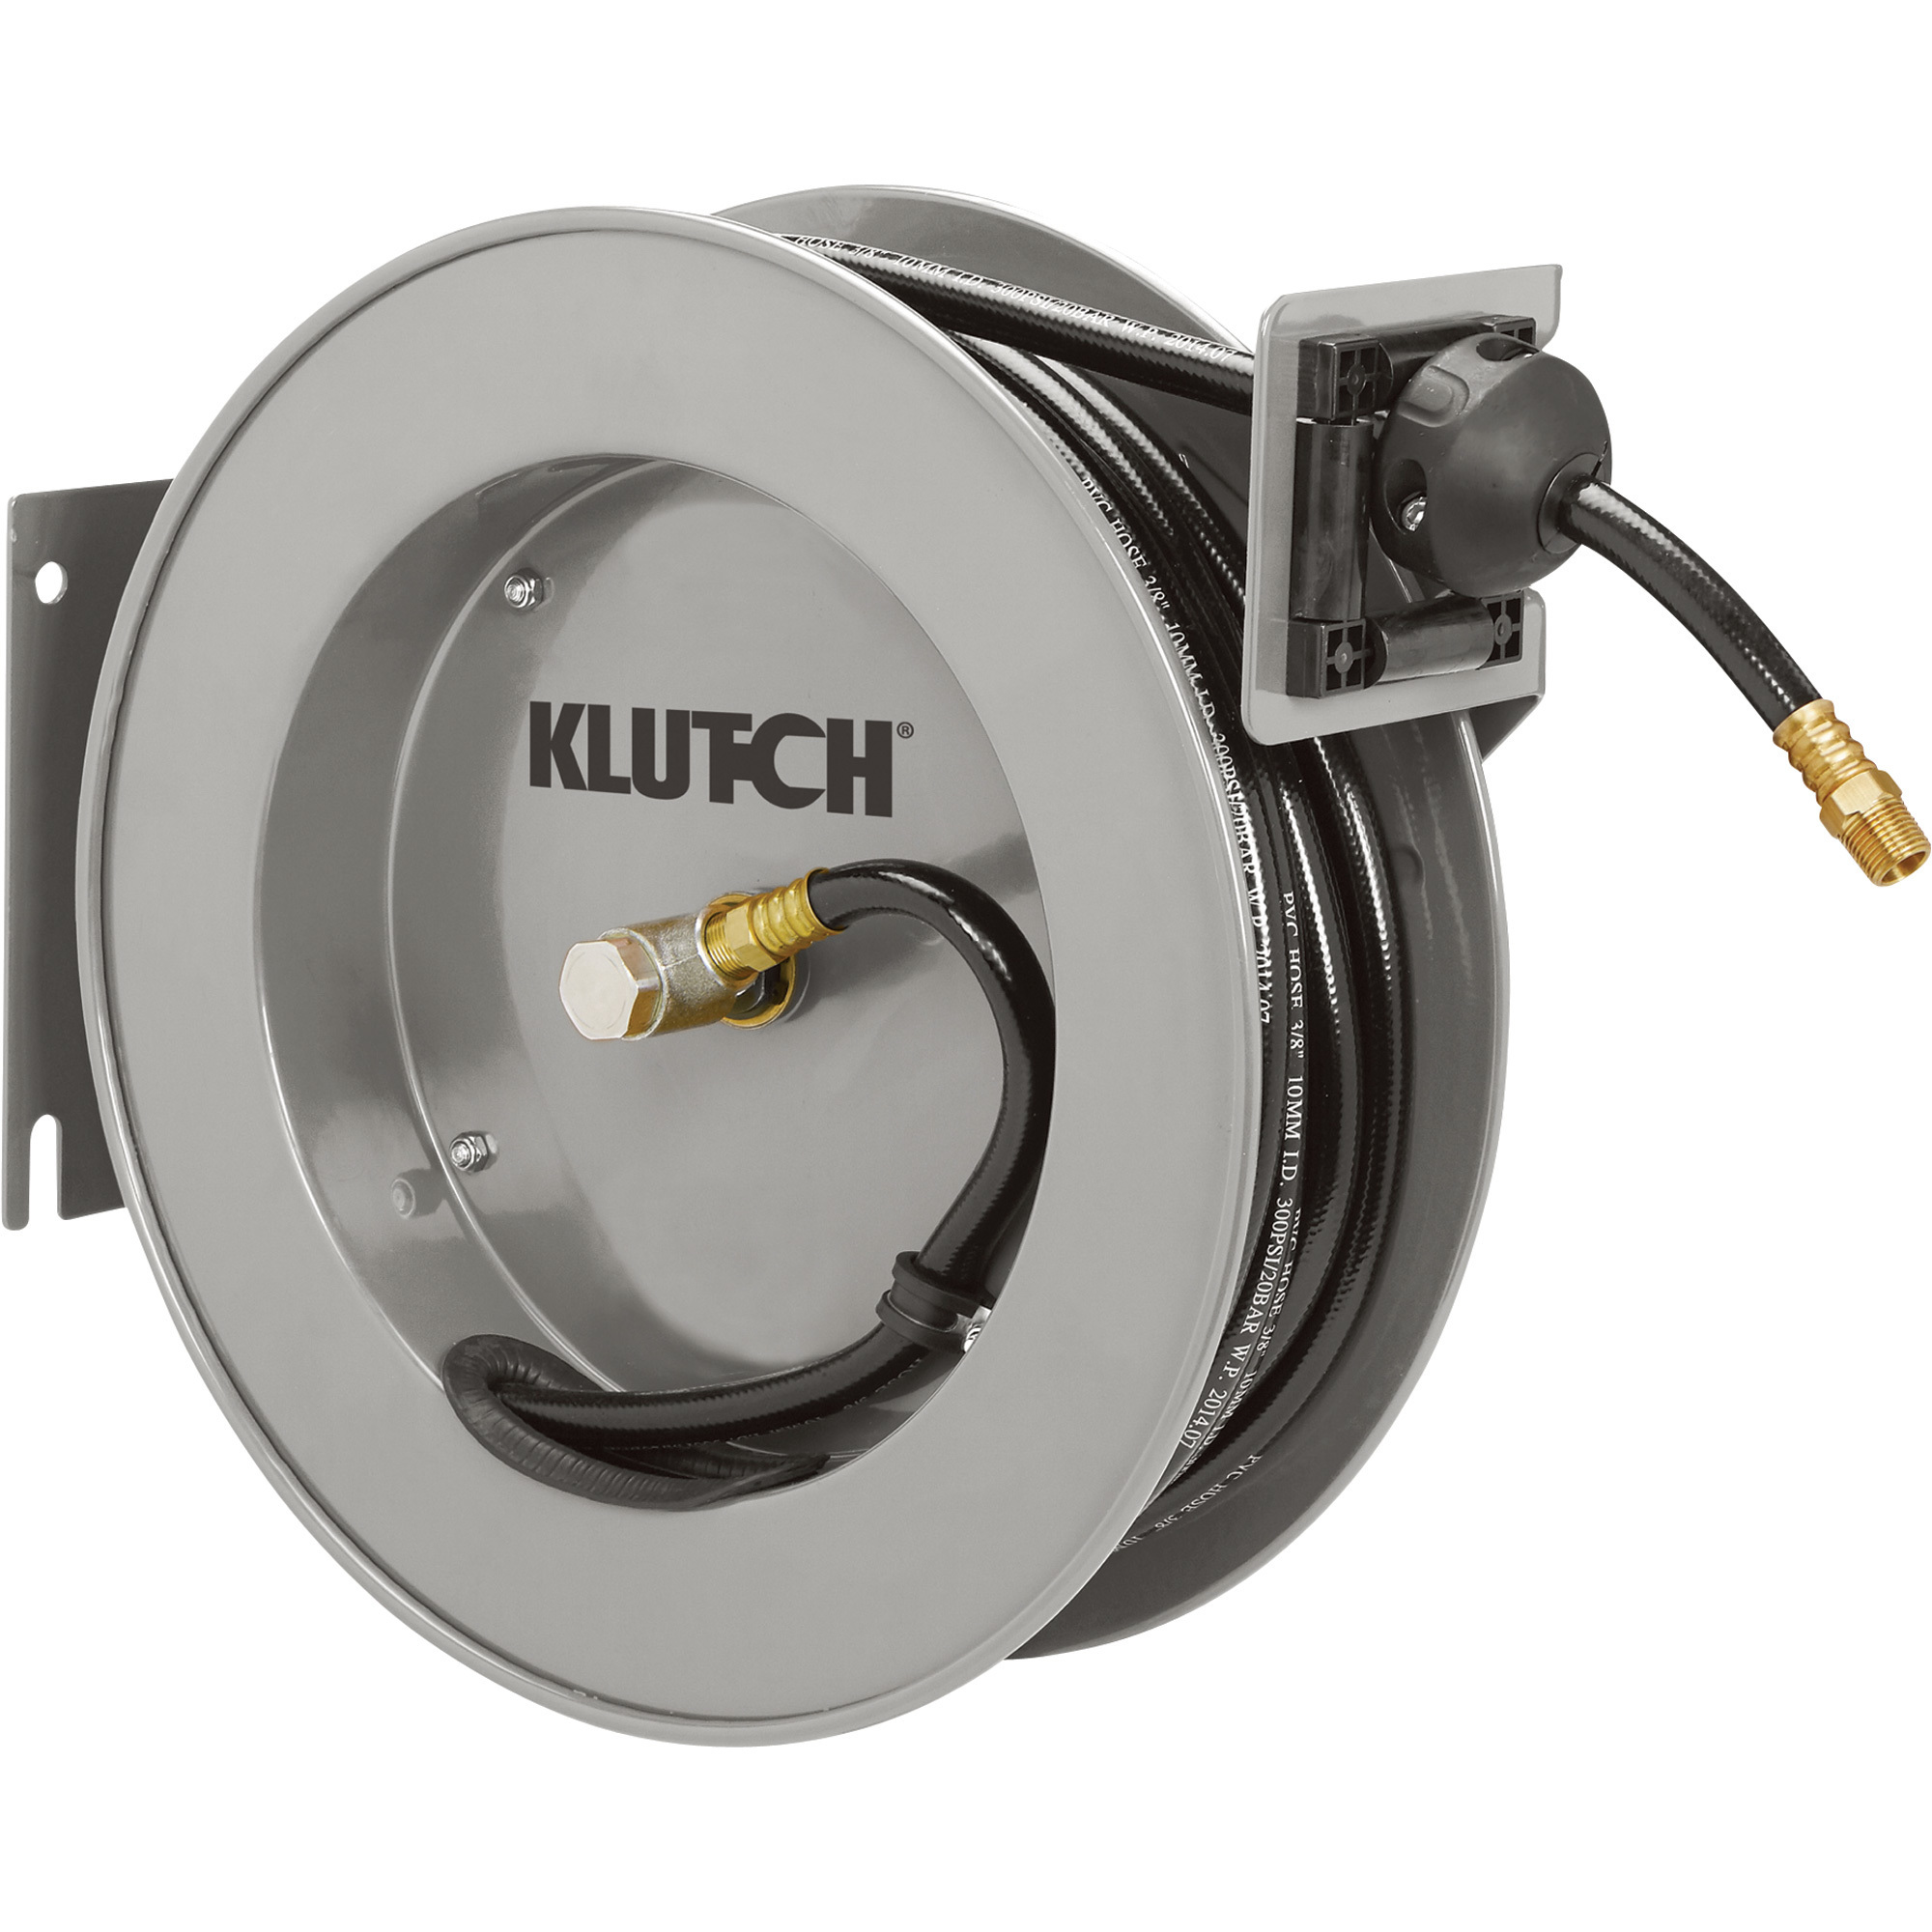 Klutch Auto Rewind Air Hose Reel, With 3/8in. x 50ft. PVC Hose